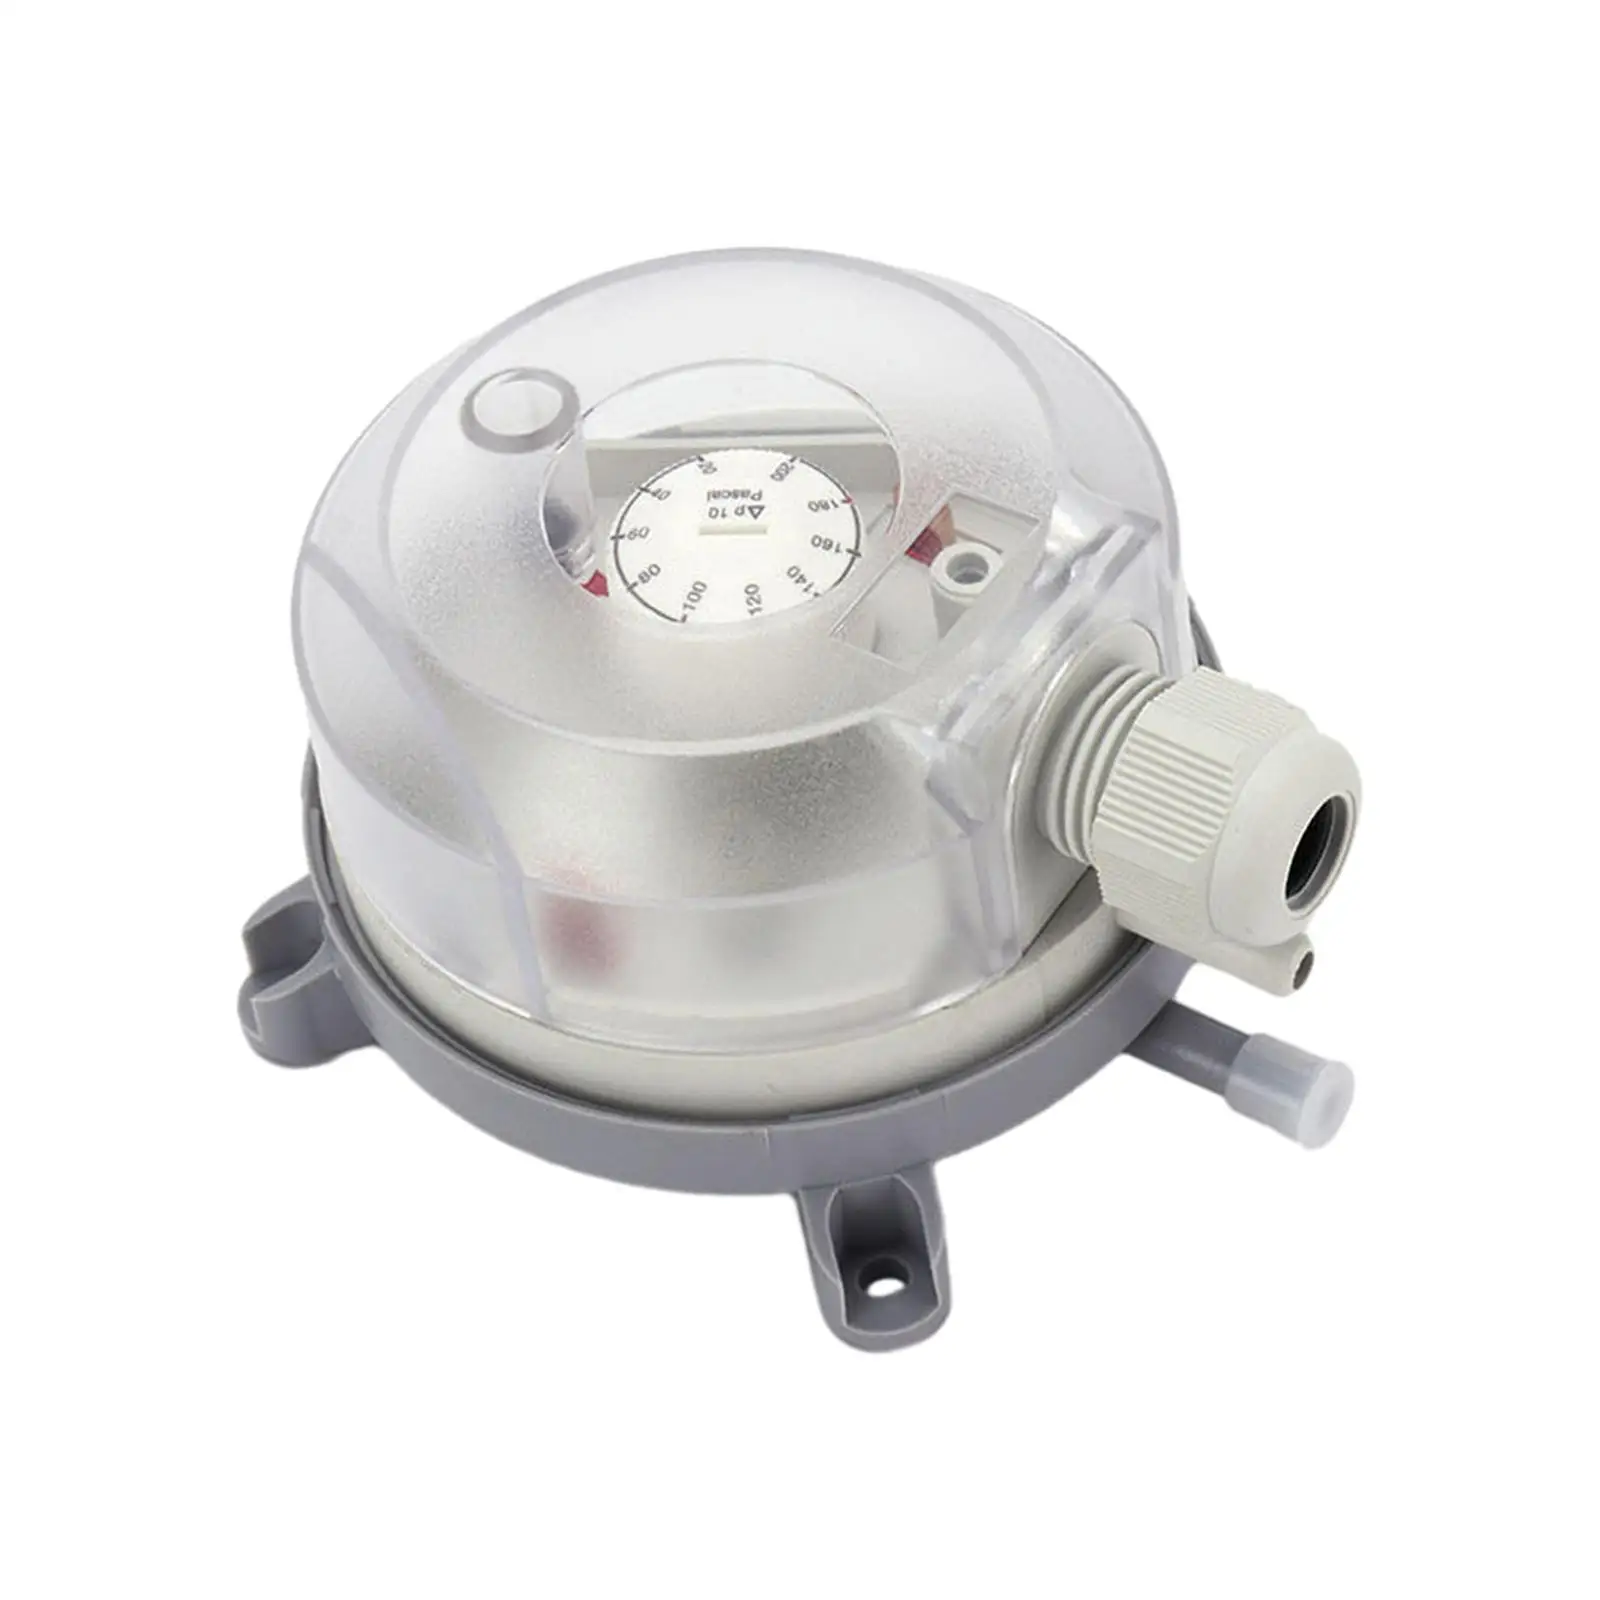 Differential Pressure Switch Dustproof Adjustable Mechanical Spdt for Environmental Protection Medical Pharmaceuticals Aerospace